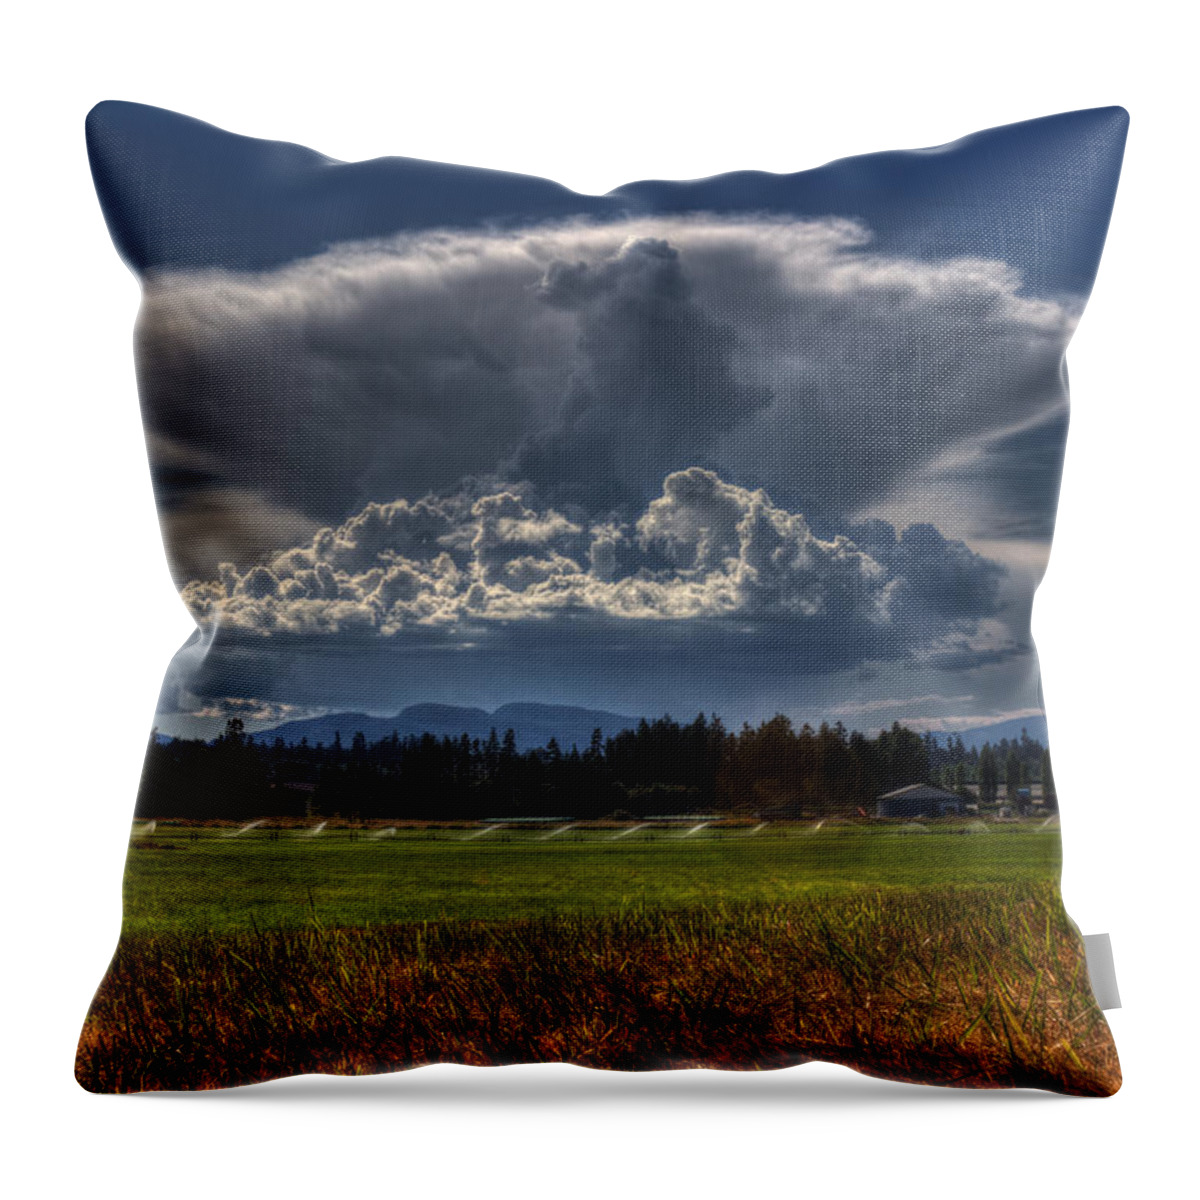 Storm Throw Pillow featuring the photograph Thunder Storm by Randy Hall